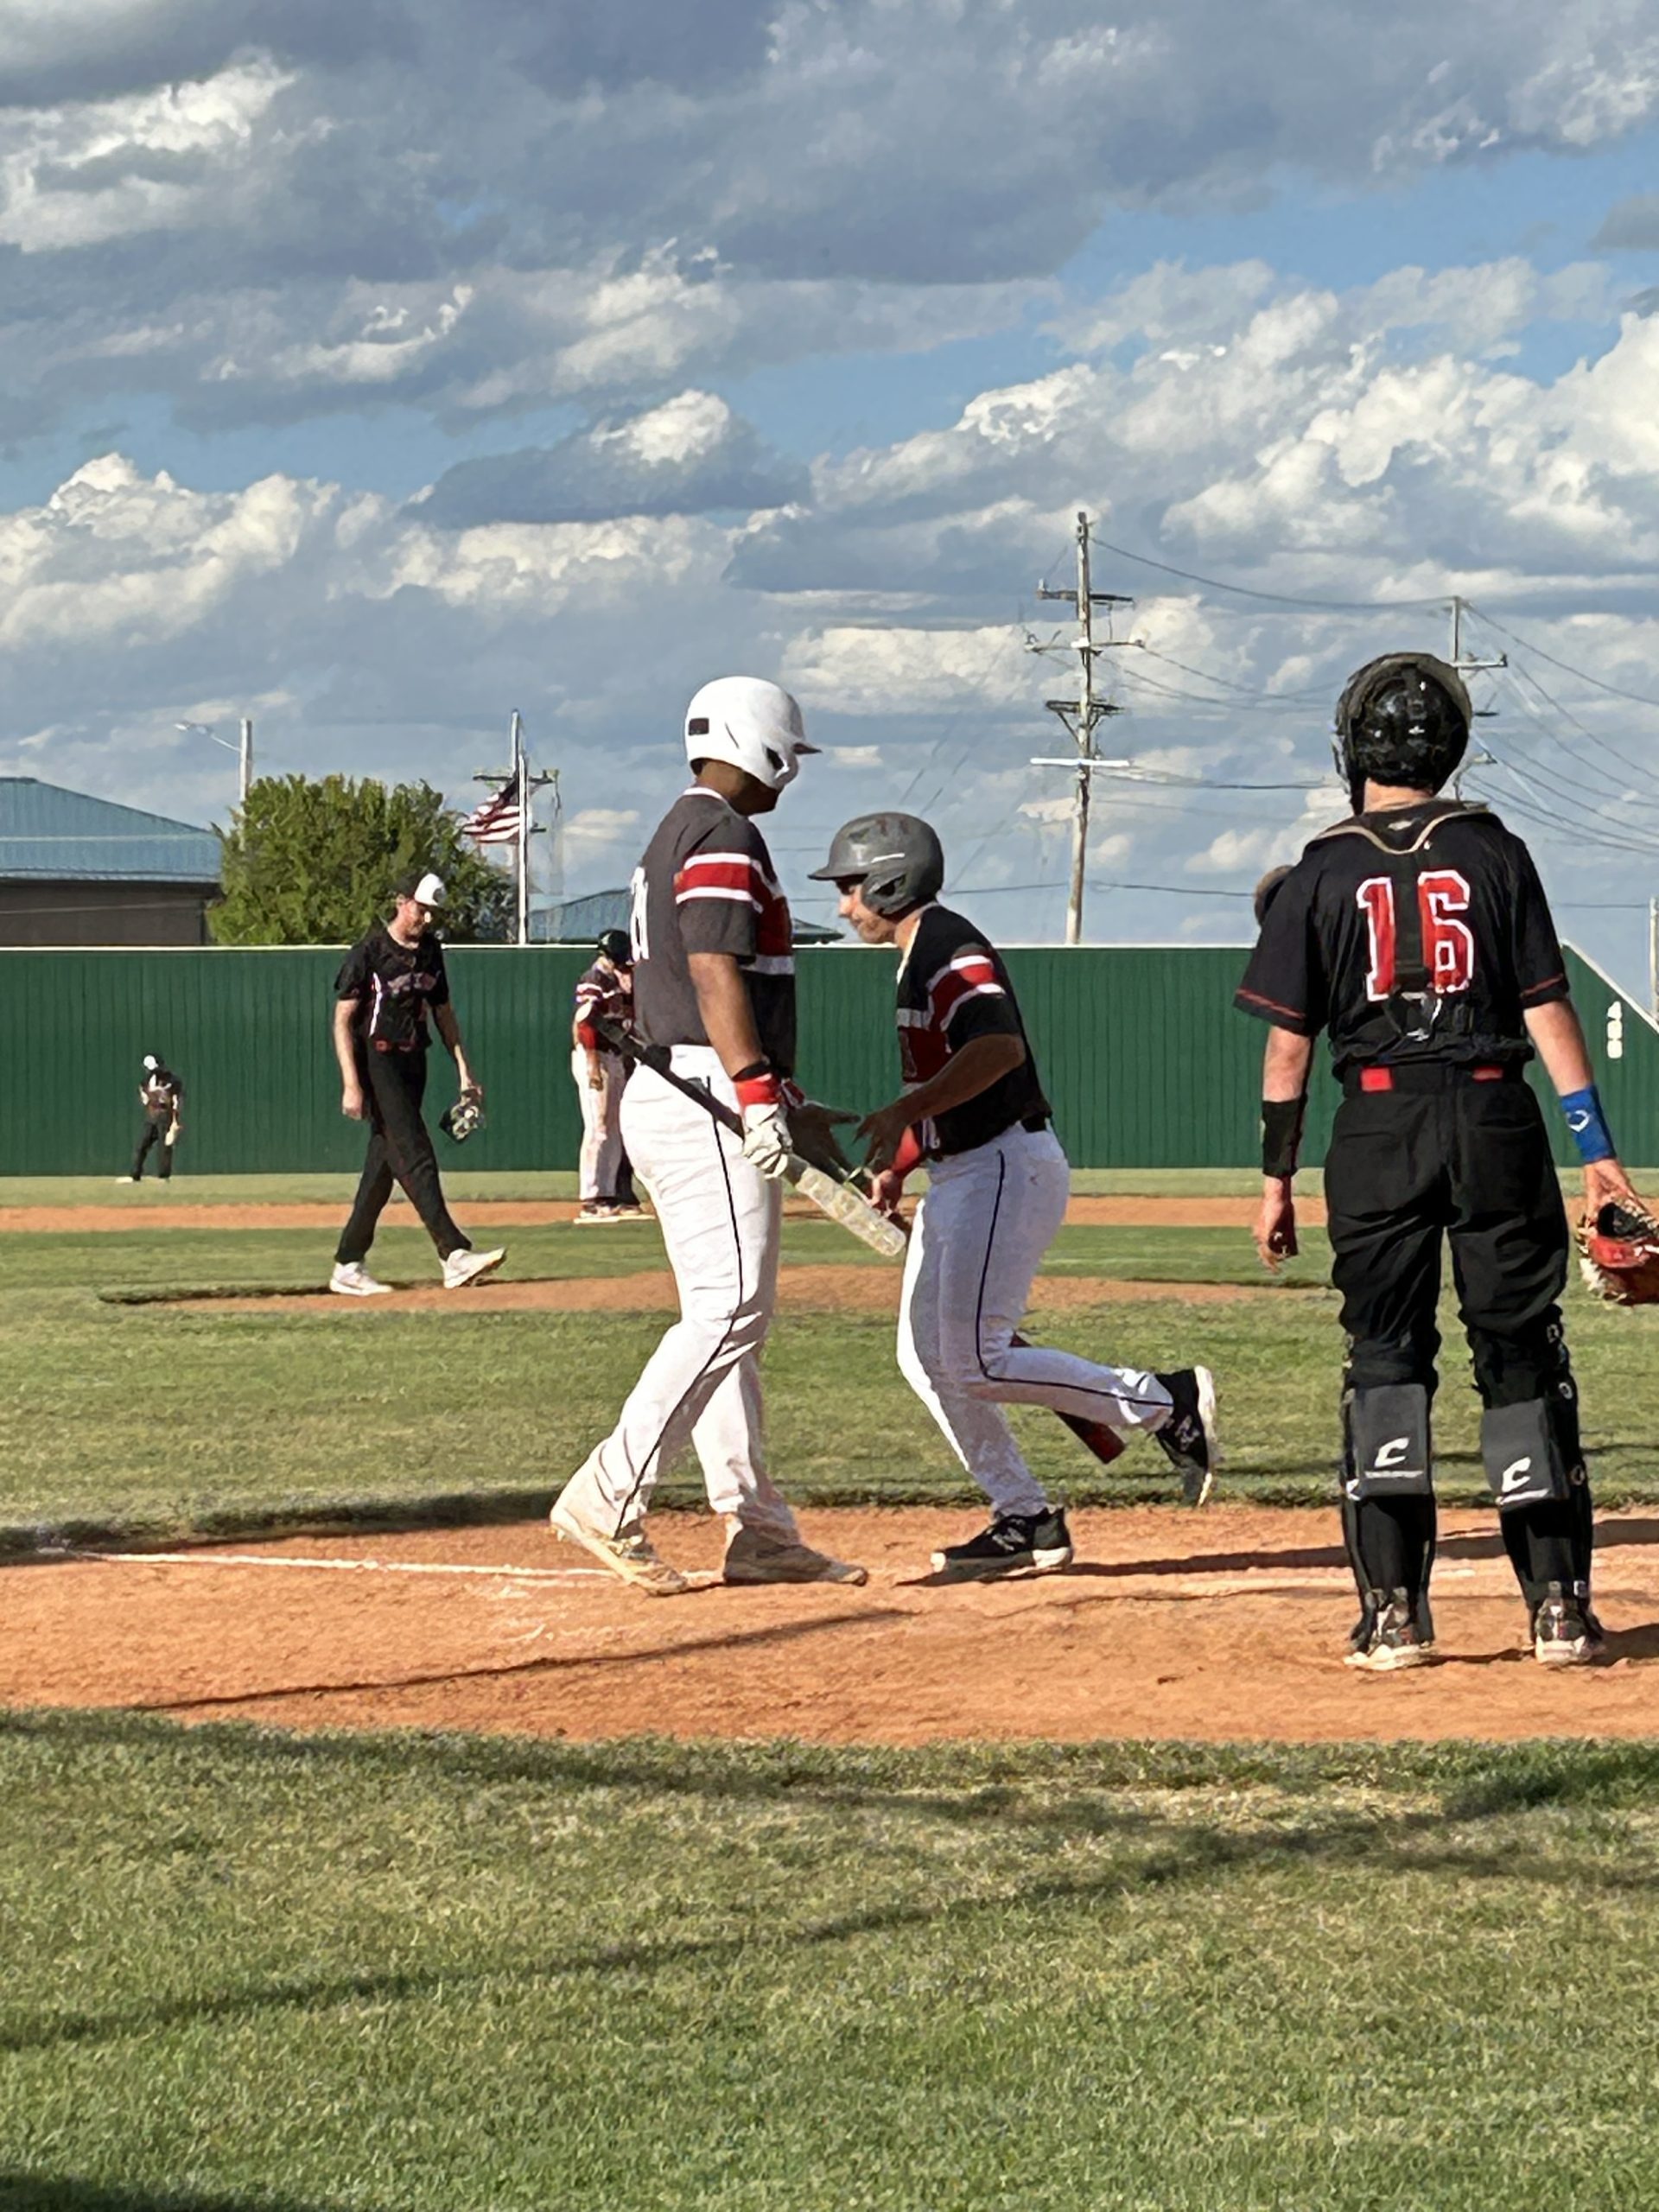 Redskins Make it 9 of Last 10 With Sweep Over Mustangs